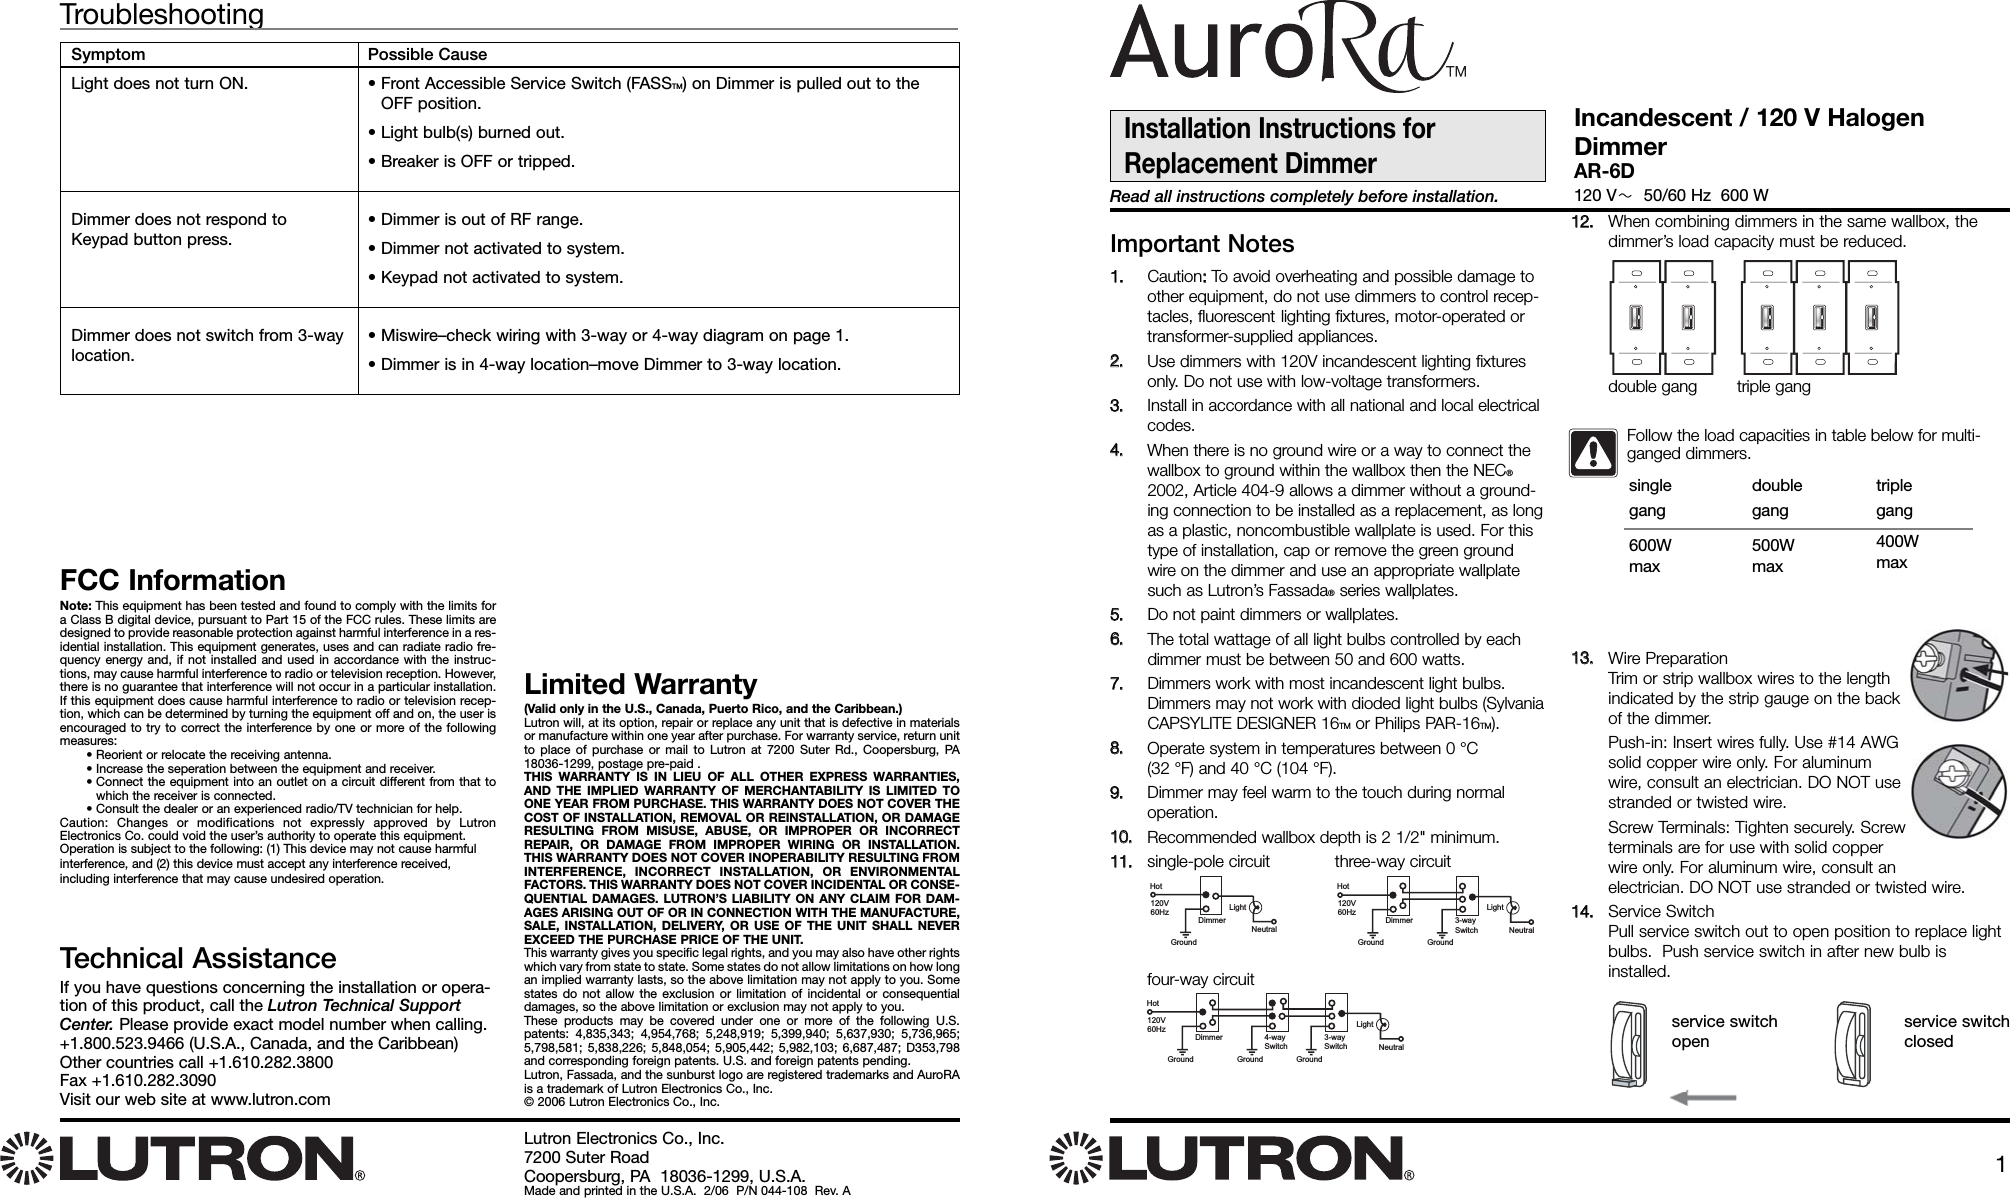 Lutron Electronics Co., Inc.7200 Suter RoadCoopersburg, PA  18036-1299, U.S.A.Made and printed in the U.S.A.  2/06  P/N 044-108  Rev. AFCC InformationNote: This equipment has been tested and found to comply with the limits fora Class B digital device, pursuant to Part 15 of the FCC rules. These limits aredesigned to provide reasonable protection against harmful interference in a res-idential installation. This equipment generates, uses and can radiate radio fre-quency energy and, if not installed and used in accordance with the instruc-tions, may cause harmful interference to radio or television reception. However,there is no guarantee that interference will not occur in a particular installation.If this equipment does cause harmful interference to radio or television recep-tion, which can be determined by turning the equipment off and on, the user isencouraged to try to correct the interference by one or more of the followingmeasures: • Reorient or relocate the receiving antenna.• Increase the seperation between the equipment and receiver.• Connect the equipment into an outlet on a circuit different from that towhich the receiver is connected.• Consult the dealer or an experienced radio/TV technician for help.Caution: Changes or modifications not expressly approved by LutronElectronics Co. could void the user’s authority to operate this equipment.Operation is subject to the following: (1) This device may not cause harmfulinterference, and (2) this device must accept any interference received, including interference that may cause undesired operation.Limited Warranty(Valid only in the U.S., Canada, Puerto Rico, and the Caribbean.)Lutron will, at its option, repair or replace any unit that is defective in materialsor manufacture within one year after purchase. For warranty service, return unitto place of purchase or mail to Lutron at 7200 Suter Rd., Coopersburg, PA18036-1299, postage pre-paid .THIS WARRANTY IS IN LIEU OF ALL OTHER EXPRESS WARRANTIES,AND THE IMPLIED WARRANTY OF MERCHANTABILITY IS LIMITED TOONE YEAR FROM PURCHASE. THIS WARRANTY DOES NOT COVER THECOST OF INSTALLATION, REMOVAL OR REINSTALLATION, OR DAMAGERESULTING FROM MISUSE, ABUSE, OR IMPROPER OR INCORRECTREPAIR, OR DAMAGE FROM IMPROPER WIRING OR INSTALLATION.THIS WARRANTY DOES NOT COVER INOPERABILITY RESULTING FROMINTERFERENCE, INCORRECT INSTALLATION, OR ENVIRONMENTALFACTORS. THIS WARRANTY DOES NOT COVER INCIDENTAL OR CONSE-QUENTIAL DAMAGES. LUTRON’S LIABILITY ON ANY CLAIM FOR DAM-AGES ARISING OUT OF OR IN CONNECTION WITH THE MANUFACTURE,SALE, INSTALLATION, DELIVERY, OR USE OF THE UNIT SHALL NEVEREXCEED THE PURCHASE PRICE OF THE UNIT.This warranty gives you specific legal rights, and you may also have other rightswhich vary from state to state. Some states do not allow limitations on how longan implied warranty lasts, so the above limitation may not apply to you. Somestates do not allow the exclusion or limitation of incidental or consequentialdamages, so the above limitation or exclusion may not apply to you.These products may be covered under one or more of the following U.S.patents: 4,835,343; 4,954,768; 5,248,919; 5,399,940; 5,637,930; 5,736,965;5,798,581; 5,838,226; 5,848,054; 5,905,442; 5,982,103; 6,687,487; D353,798and corresponding foreign patents. U.S. and foreign patents pending. Lutron, Fassada, and the sunburst logo are registered trademarks and AuroRAis a trademark of Lutron Electronics Co., Inc.© 2006 Lutron Electronics Co., Inc.Technical AssistanceIf you have questions concerning the installation or opera-tion of this product, call the Lutron Technical SupportCenter. Please provide exact model number when calling.+1.800.523.9466 (U.S.A., Canada, and the Caribbean)Other countries call +1.610.282.3800Fax +1.610.282.3090Visit our web site at www.lutron.comImportant Notes11..  Caution::  To avoid overheating and possible damage toother equipment, do not use dimmers to control recep-tacles, fluorescent lighting fixtures, motor-operated ortransformer-supplied appliances.22..Use dimmers with 120V incandescent lighting fixturesonly. Do not use with low-voltage transformers. 33..Install in accordance with all national and local electricalcodes.44..When there is no ground wire or a way to connect thewallbox to ground within the wallbox then the NEC®2002, Article 404-9 allows a dimmer without a ground-ing connection to be installed as a replacement, as longas a plastic, noncombustible wallplate is used. For thistype of installation, cap or remove the green groundwire on the dimmer and use an appropriate wallplatesuch as Lutron’s Fassada®series wallplates.55..Do not paint dimmers or wallplates.66..The total wattage of all light bulbs controlled by eachdimmer must be between 50 and 600 watts. 77..Dimmers work with most incandescent light bulbs.Dimmers may not work with dioded light bulbs (SylvaniaCAPSYLITE DESIGNER 16TM or Philips PAR-16TM).88..Operate system in temperatures between 0 °C (32 °F) and 40 °C (104 °F).99..Dimmer may feel warm to the touch during normaloperation.1100..Recommended wallbox depth is 2 1/2&quot; minimum.1111..single-pole circuit three-way circuitfour-way circuit1122..When combining dimmers in the same wallbox, thedimmer’s load capacity must be reduced.1133..Wire PreparationTrim or strip wallbox wires to the lengthindicated by the strip gauge on the backof the dimmer. Push-in: Insert wires fully. Use #14 AWGsolid copper wire only. For aluminumwire, consult an electrician. DO NOT usestranded or twisted wire.Screw Terminals: Tighten securely. Screwterminals are for use with solid copperwire only. For aluminum wire, consult anelectrician. DO NOT use stranded or twisted wire.1144..Service SwitchPull service switch out to open position to replace lightbulbs.  Push service switch in after new bulb isinstalled.Installation Instructions forReplacement DimmerRead all instructions completely before installation.Incandescent / 120 V HalogenDimmerAR-6D120 V 50/60 Hz  600 WPossible Cause• Front Accessible Service Switch (FASSTM) on Dimmer is pulled out to theOFF position.• Light bulb(s) burned out.• Breaker is OFF or tripped.• Dimmer is out of RF range.• Dimmer not activated to system.• Keypad not activated to system.• Miswire–check wiring with 3-way or 4-way diagram on page 1.• Dimmer is in 4-way location–move Dimmer to 3-way location.TroubleshootingSymptomLight does not turn ON.Dimmer does not respond toKeypad button press.Dimmer does not switch from 3-waylocation.Follow the load capacities in table below for multi-ganged dimmers.singlegang600Wmaxdoublegang500Wmaxtriple gang400Wmaxdouble gang        triple gangservice switchopenservice switchclosedHot120V60HzDimmerGround GroundNeutralLight3-waySwitchHot120V60HzDimmerGroundNeutralLightHot120V60HzDimmer 3-waySwitchGround Ground GroundNeutralLight4-waySwitch1